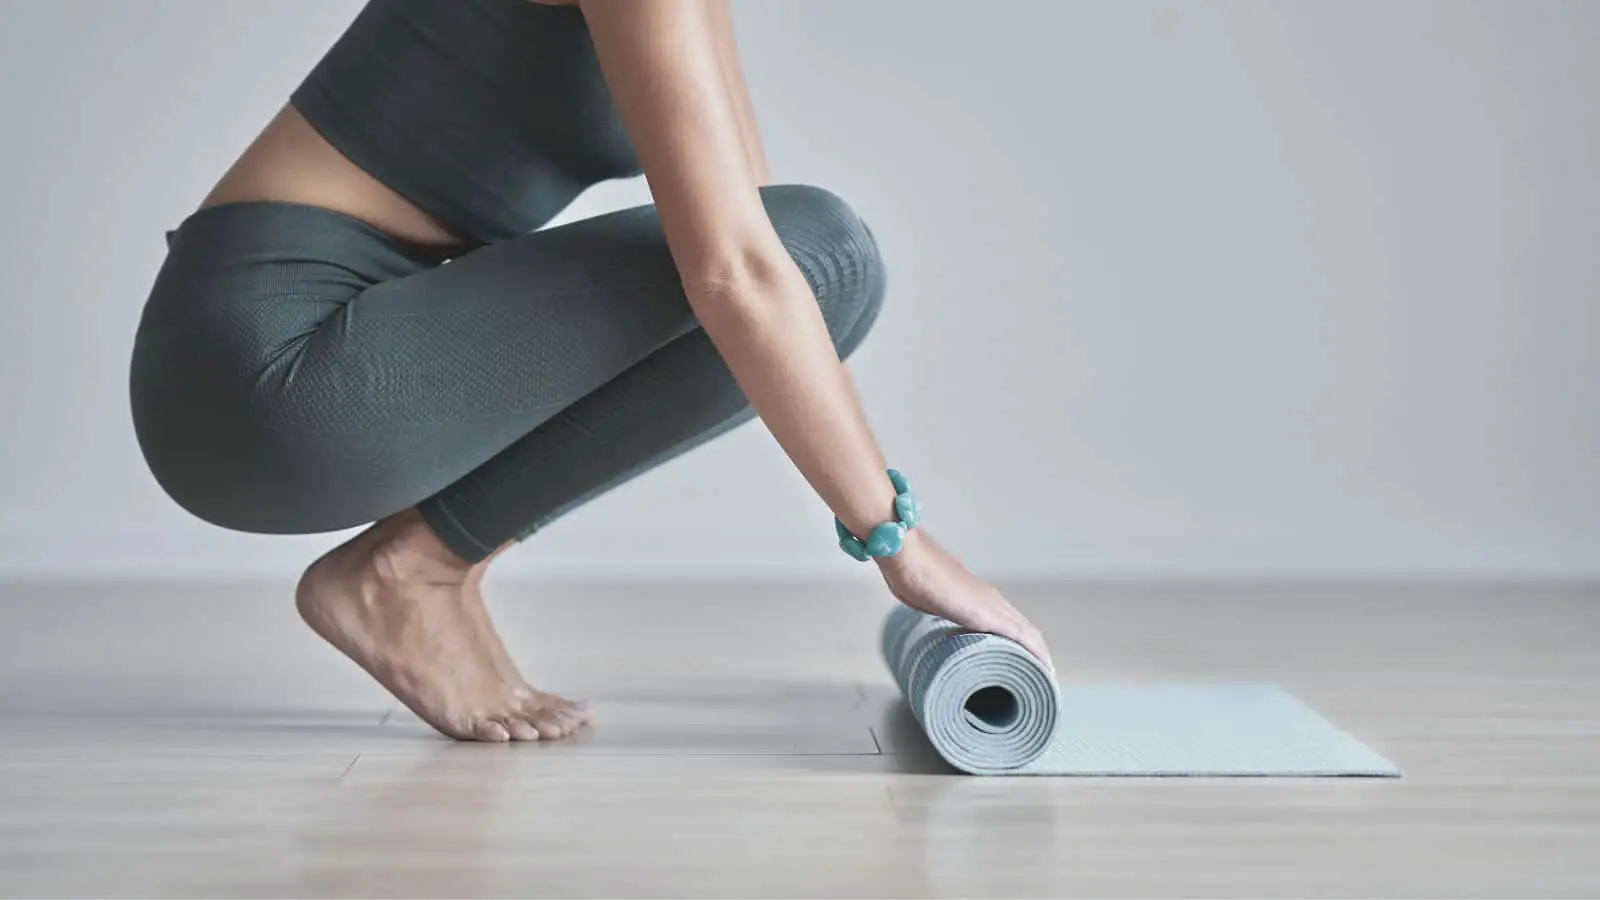 What to do about a yoga mat that stretches?